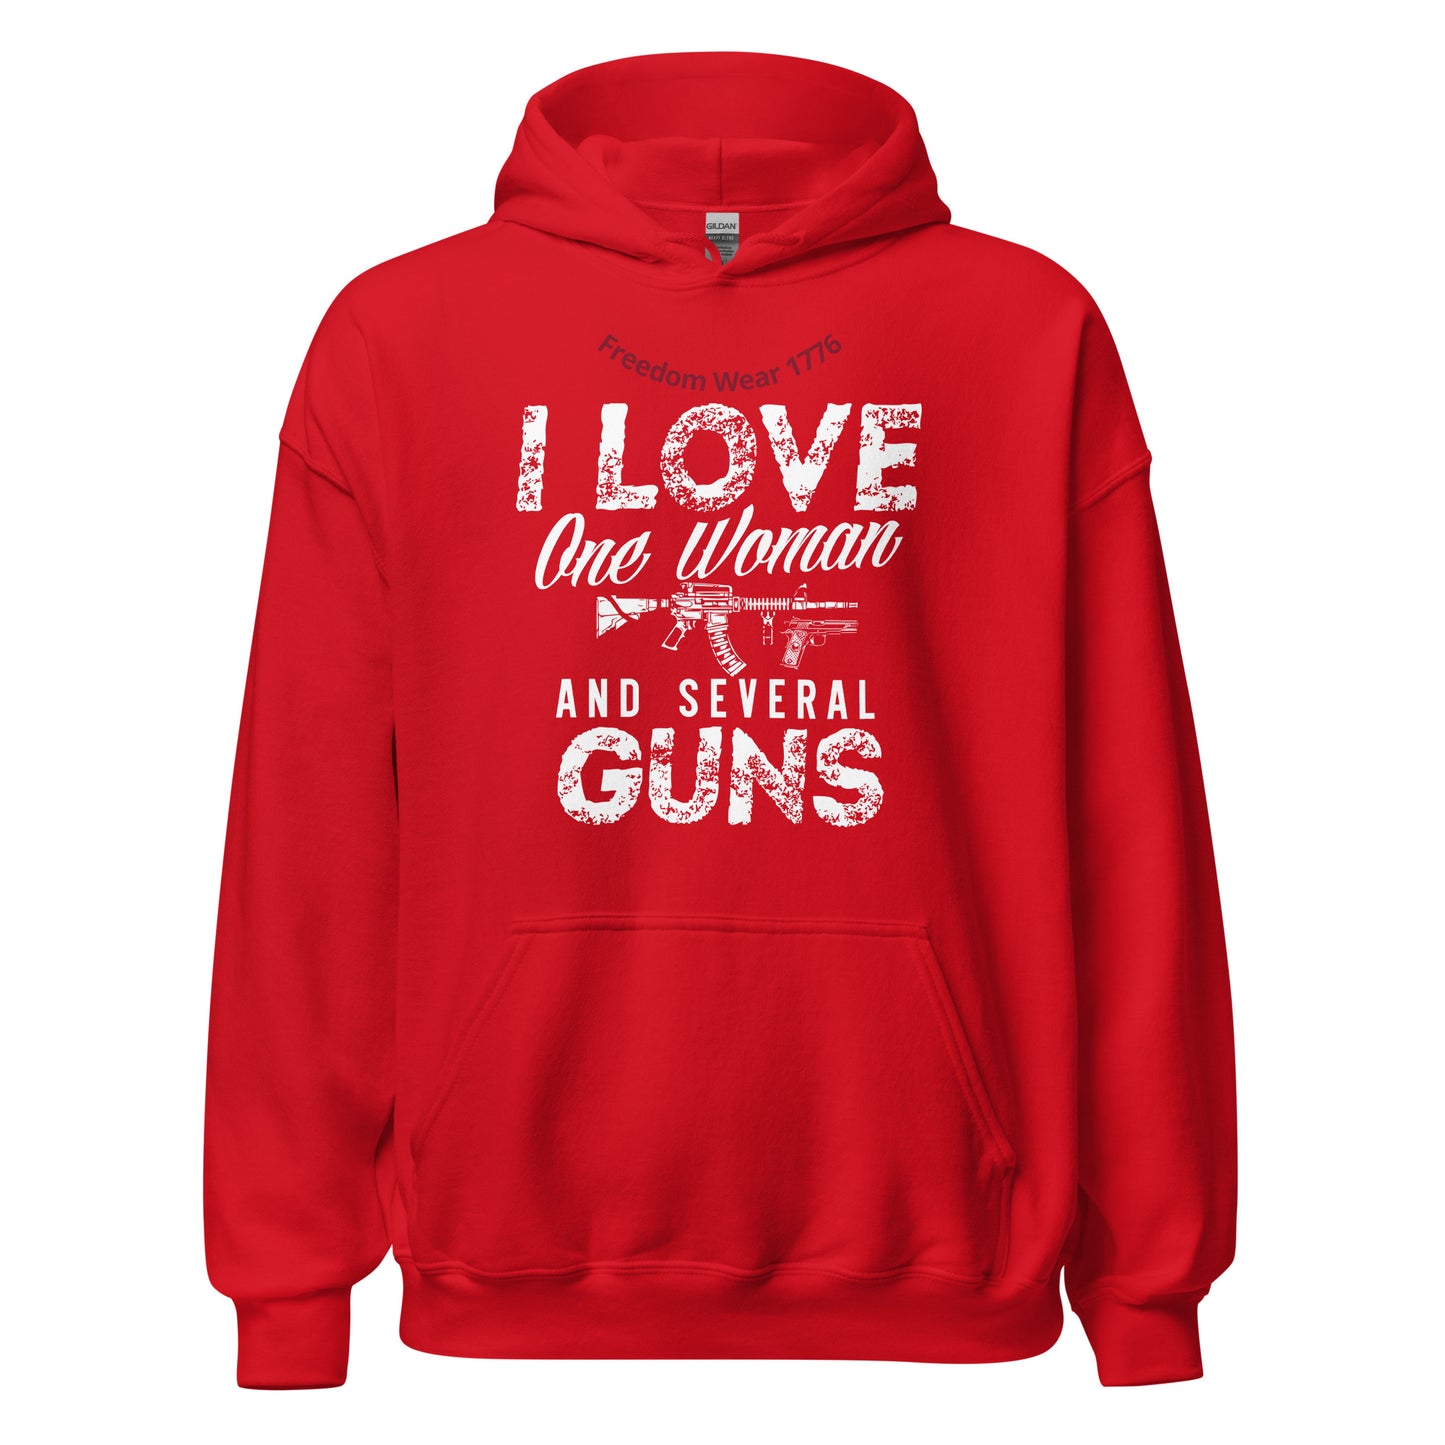 One Woman and Several Guns Hoodie